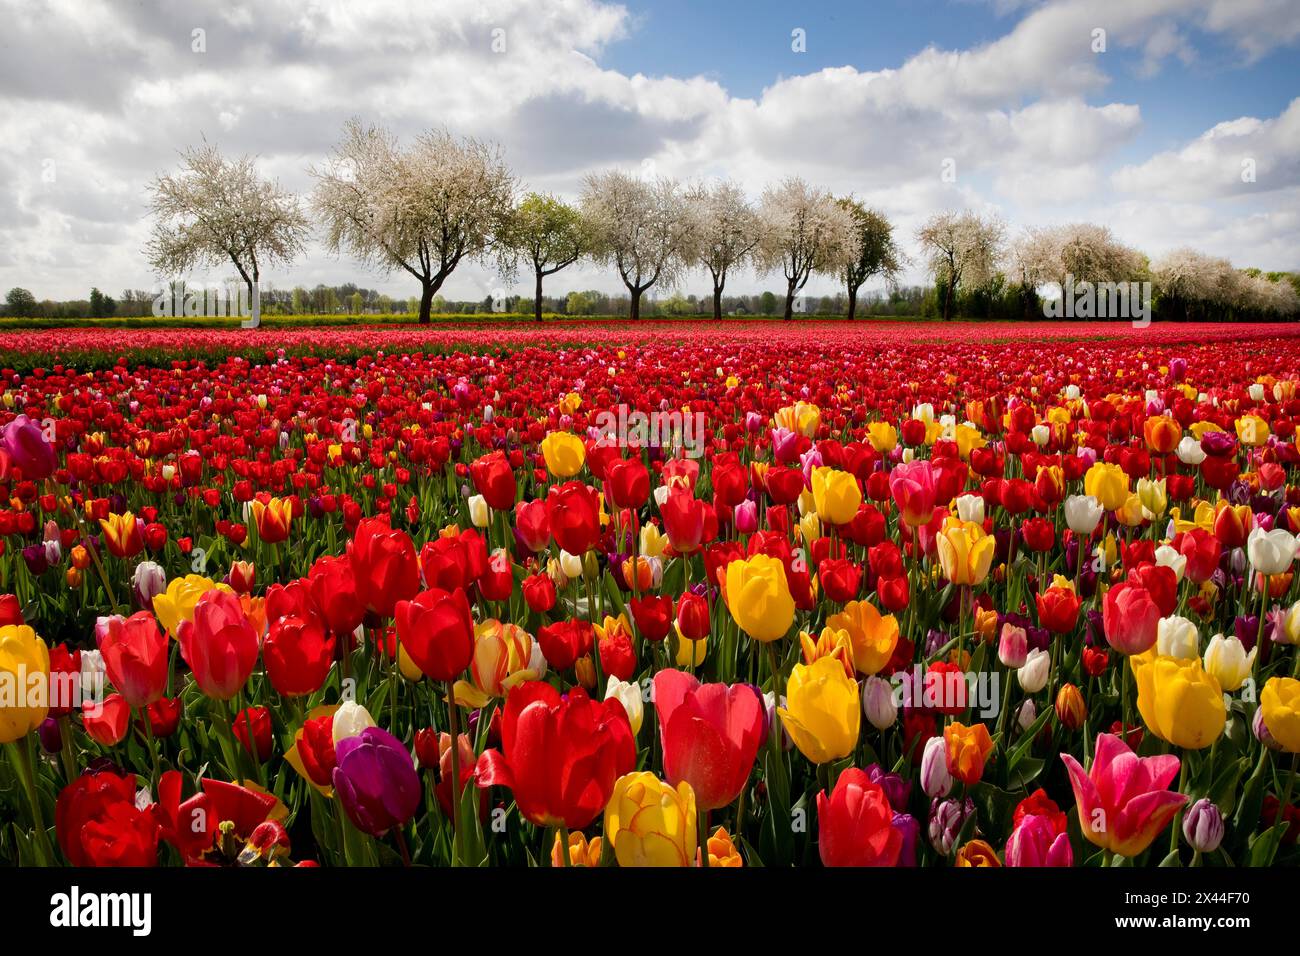 Splendid mixture on the tulip field in front of blossoming fruit trees, Grevenbroich, Lower Rhine, North Rhine-Westphalia, Germany Stock Photo